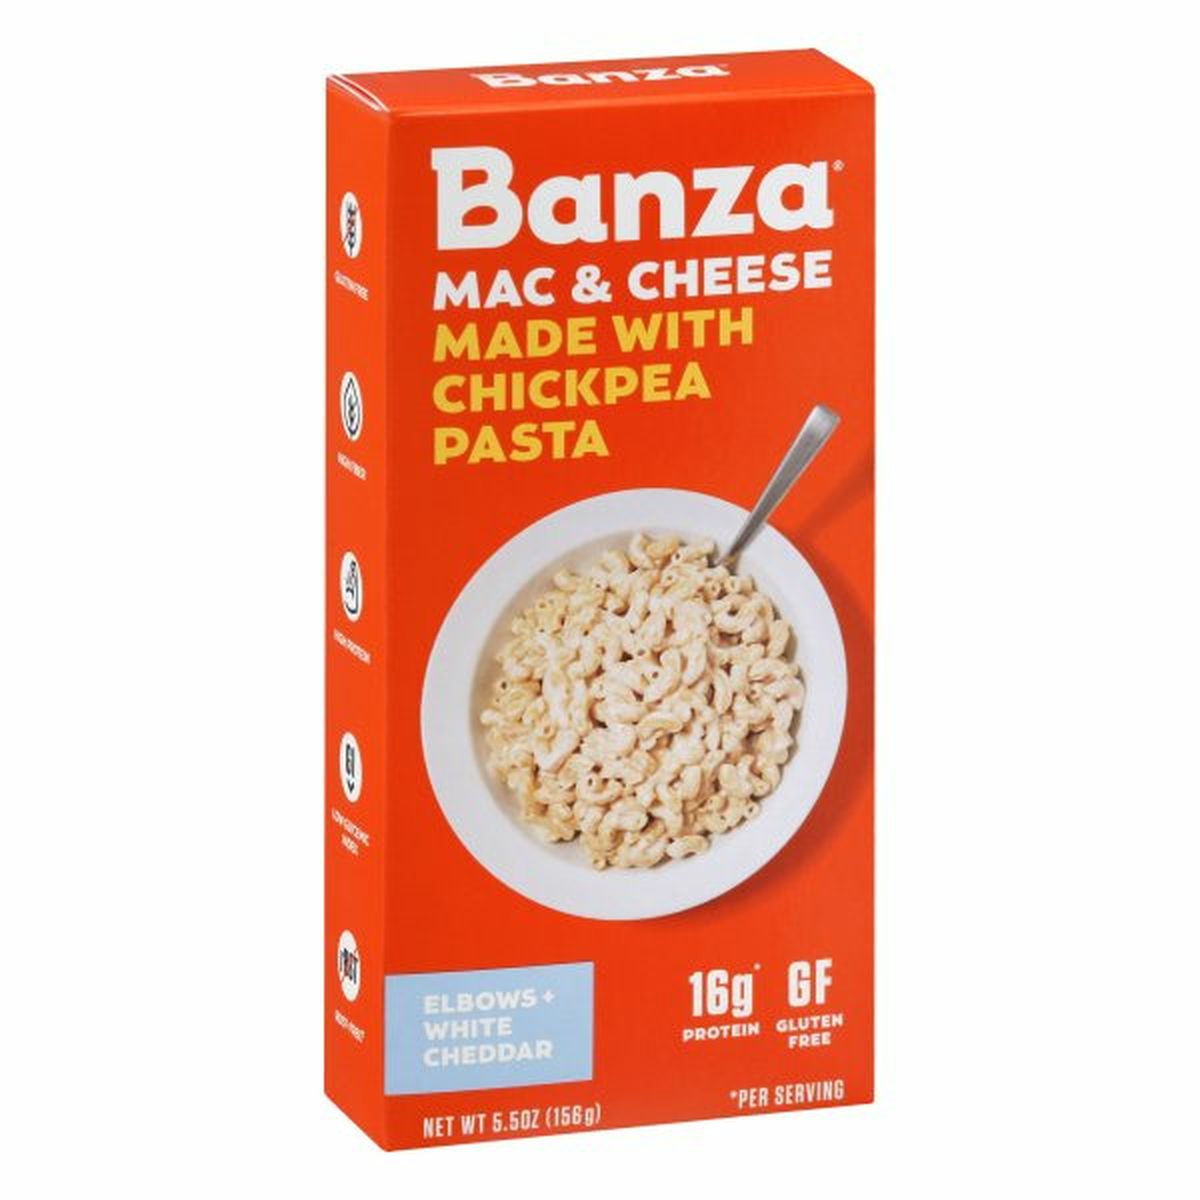 Calories in Banza Mac & Cheese, Made with Chickpea Pasta, Elbows + White Cheddar